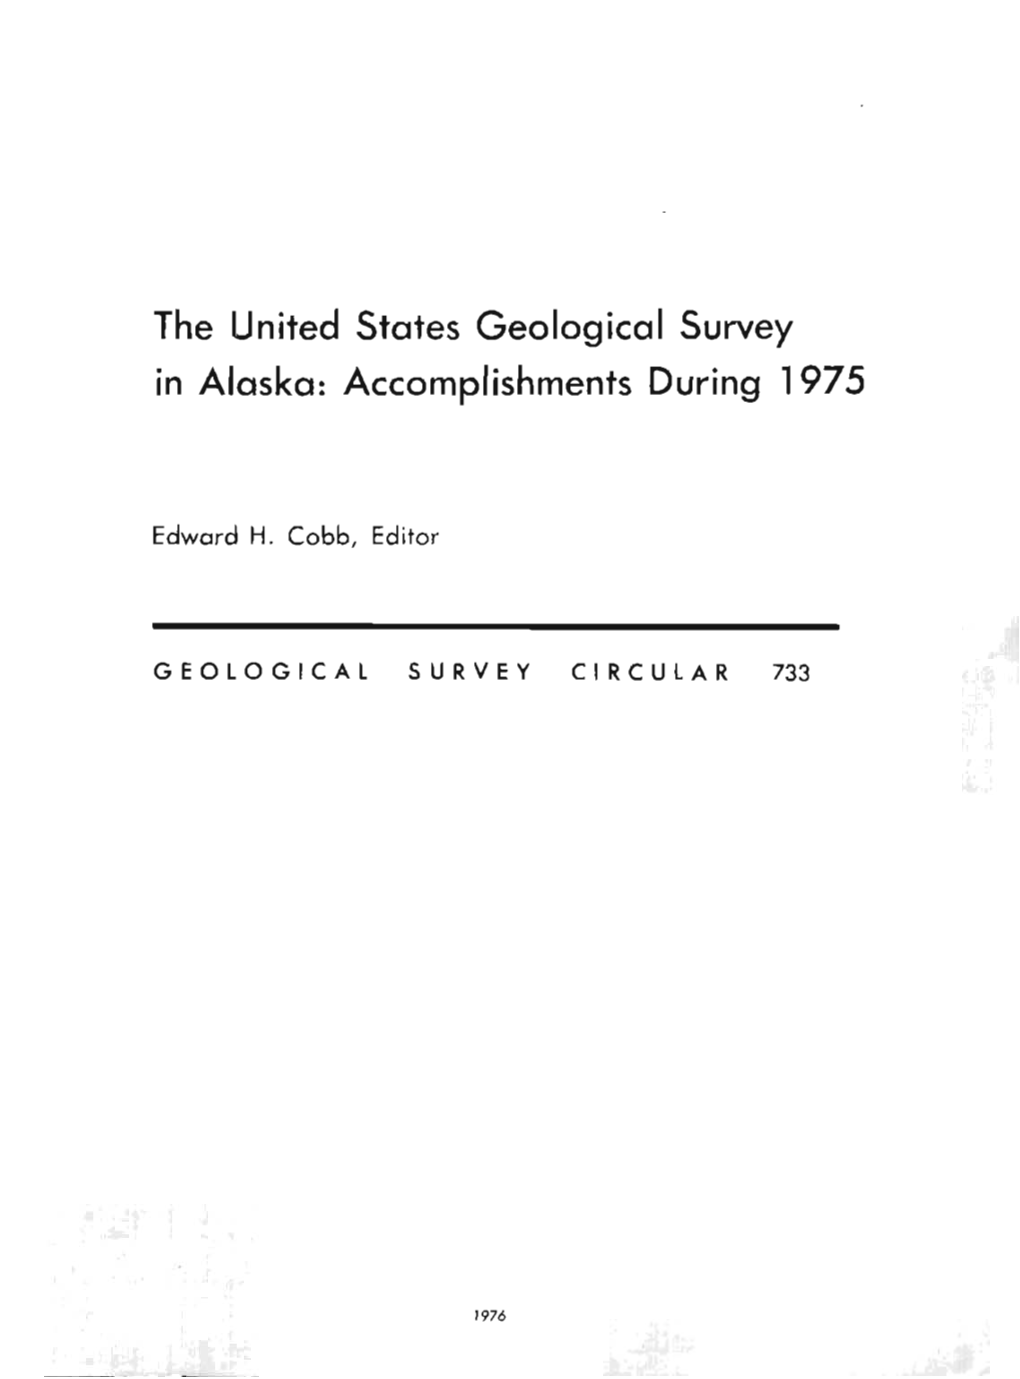 The United States Geological Survey in Alaska: Accomplishments During 1975